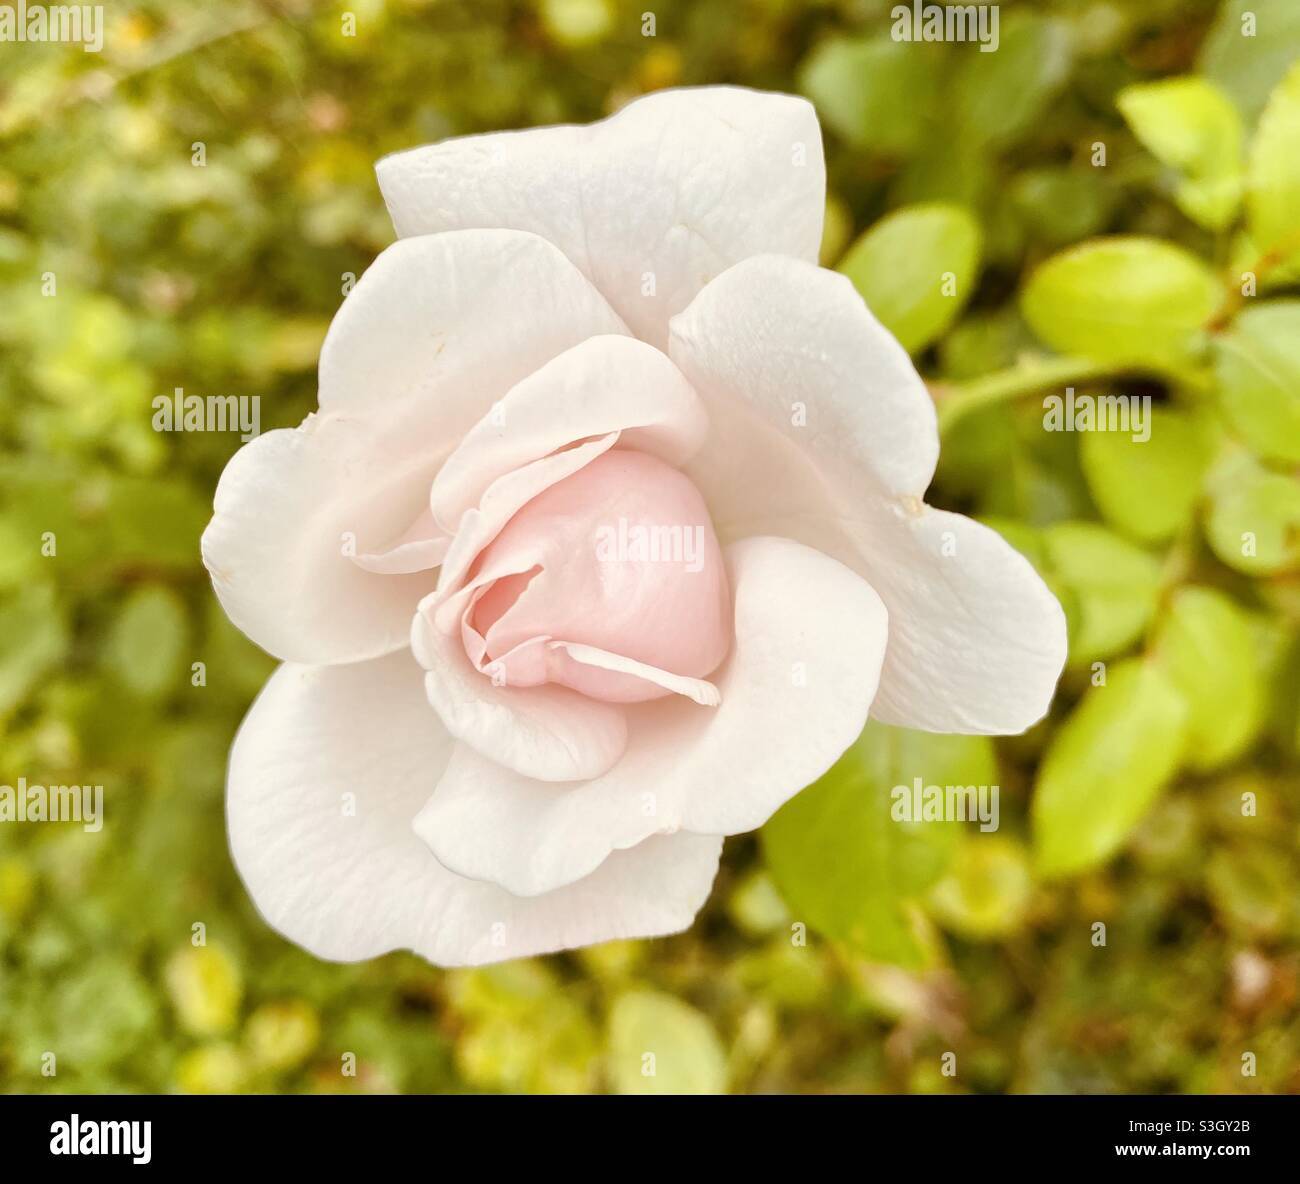 White rose petal in bloom garden nature photography Stock Photo